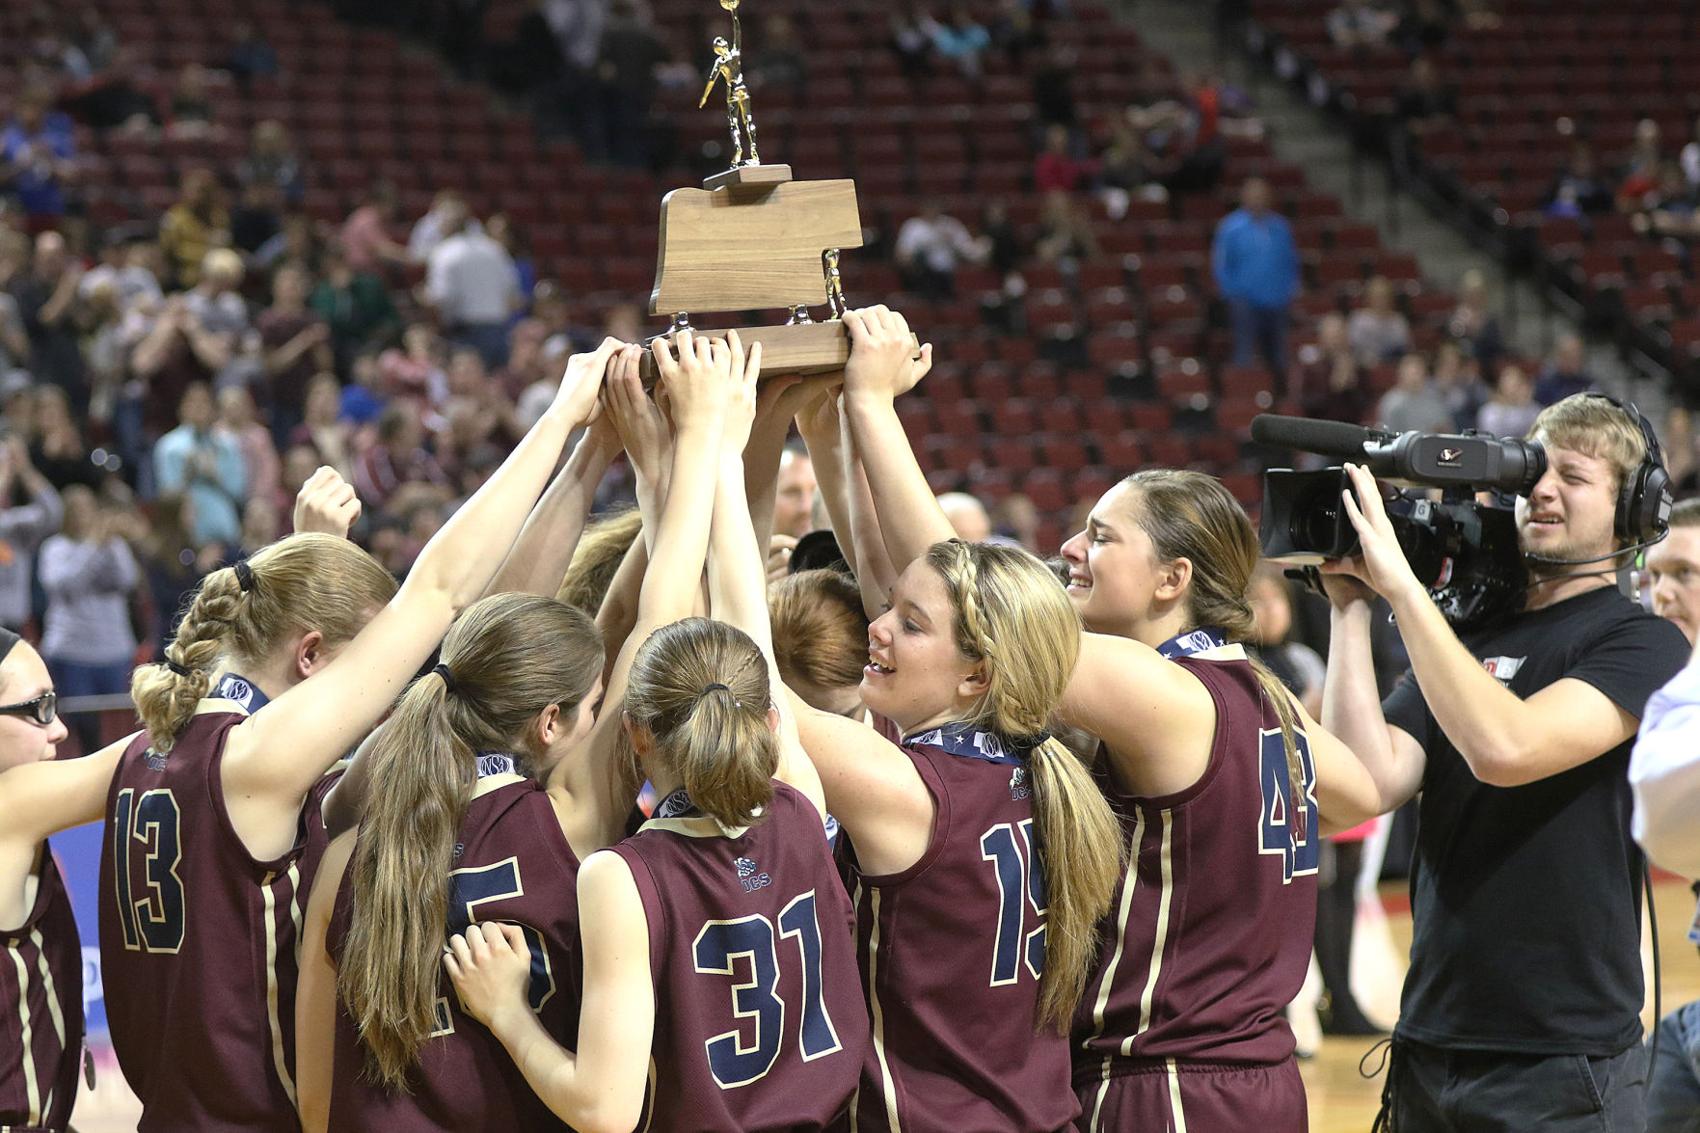 Finals Class D1 Dundy CountyStratton takes second, falls to GACC